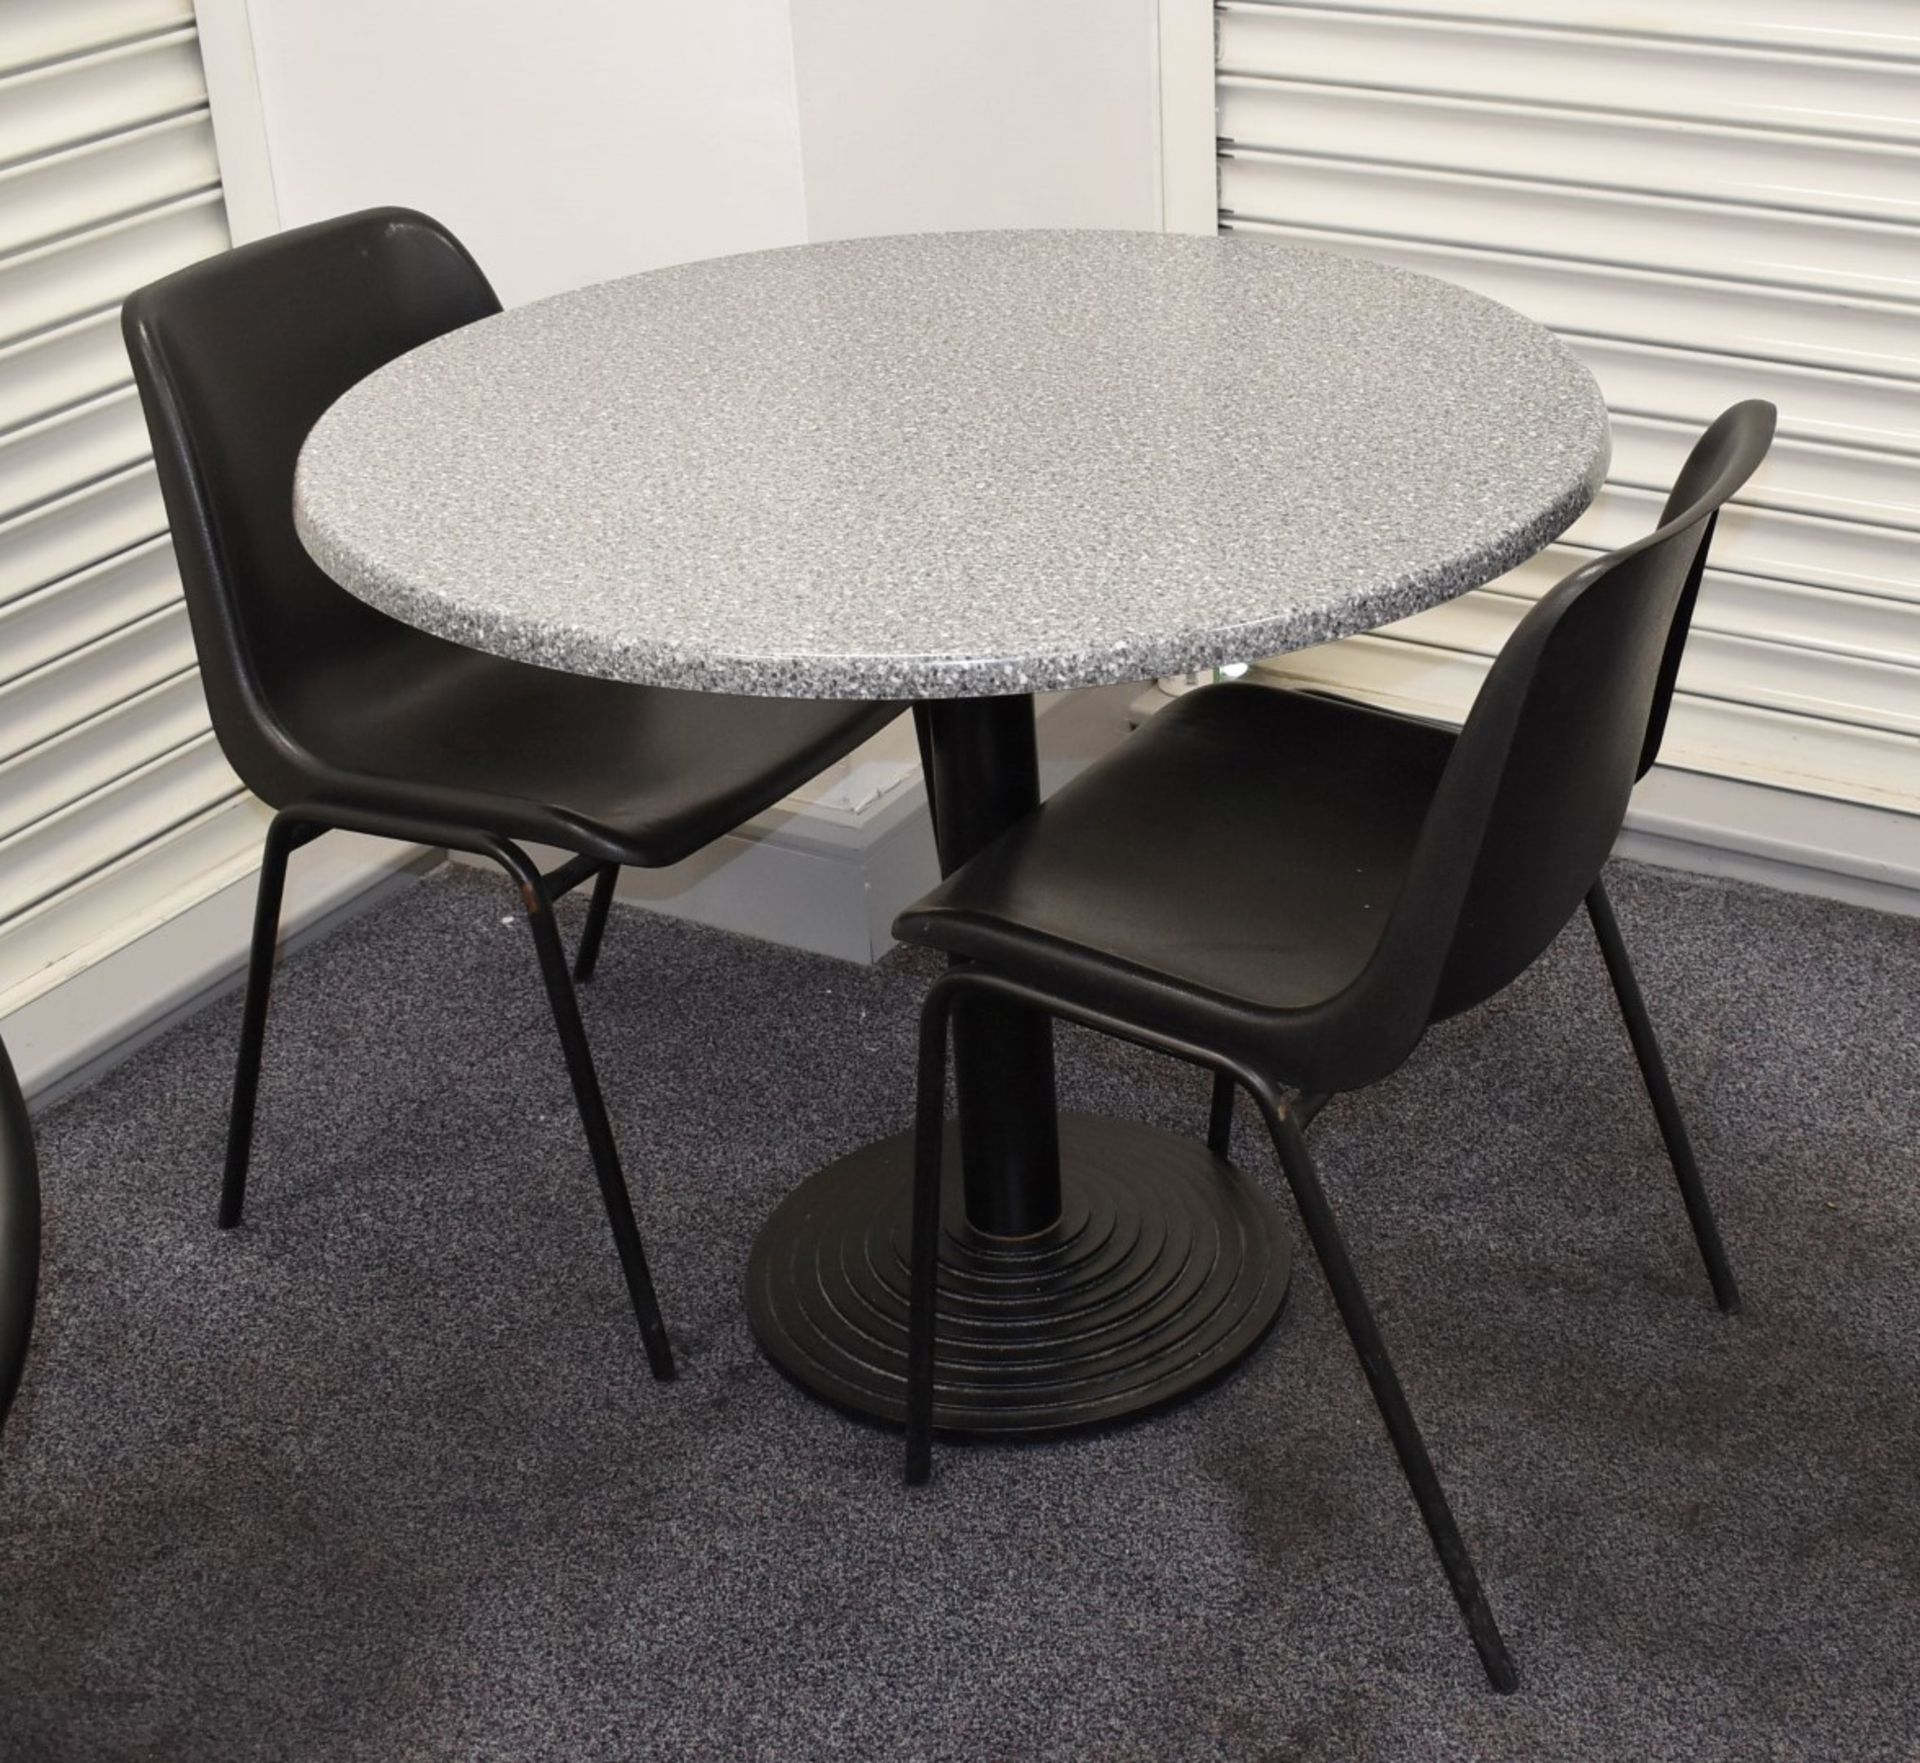 4 x Canteen Tables and 8 x Stackable Chairs - Granite Effect 90cm Table Tops With Cast Iron - Image 4 of 6